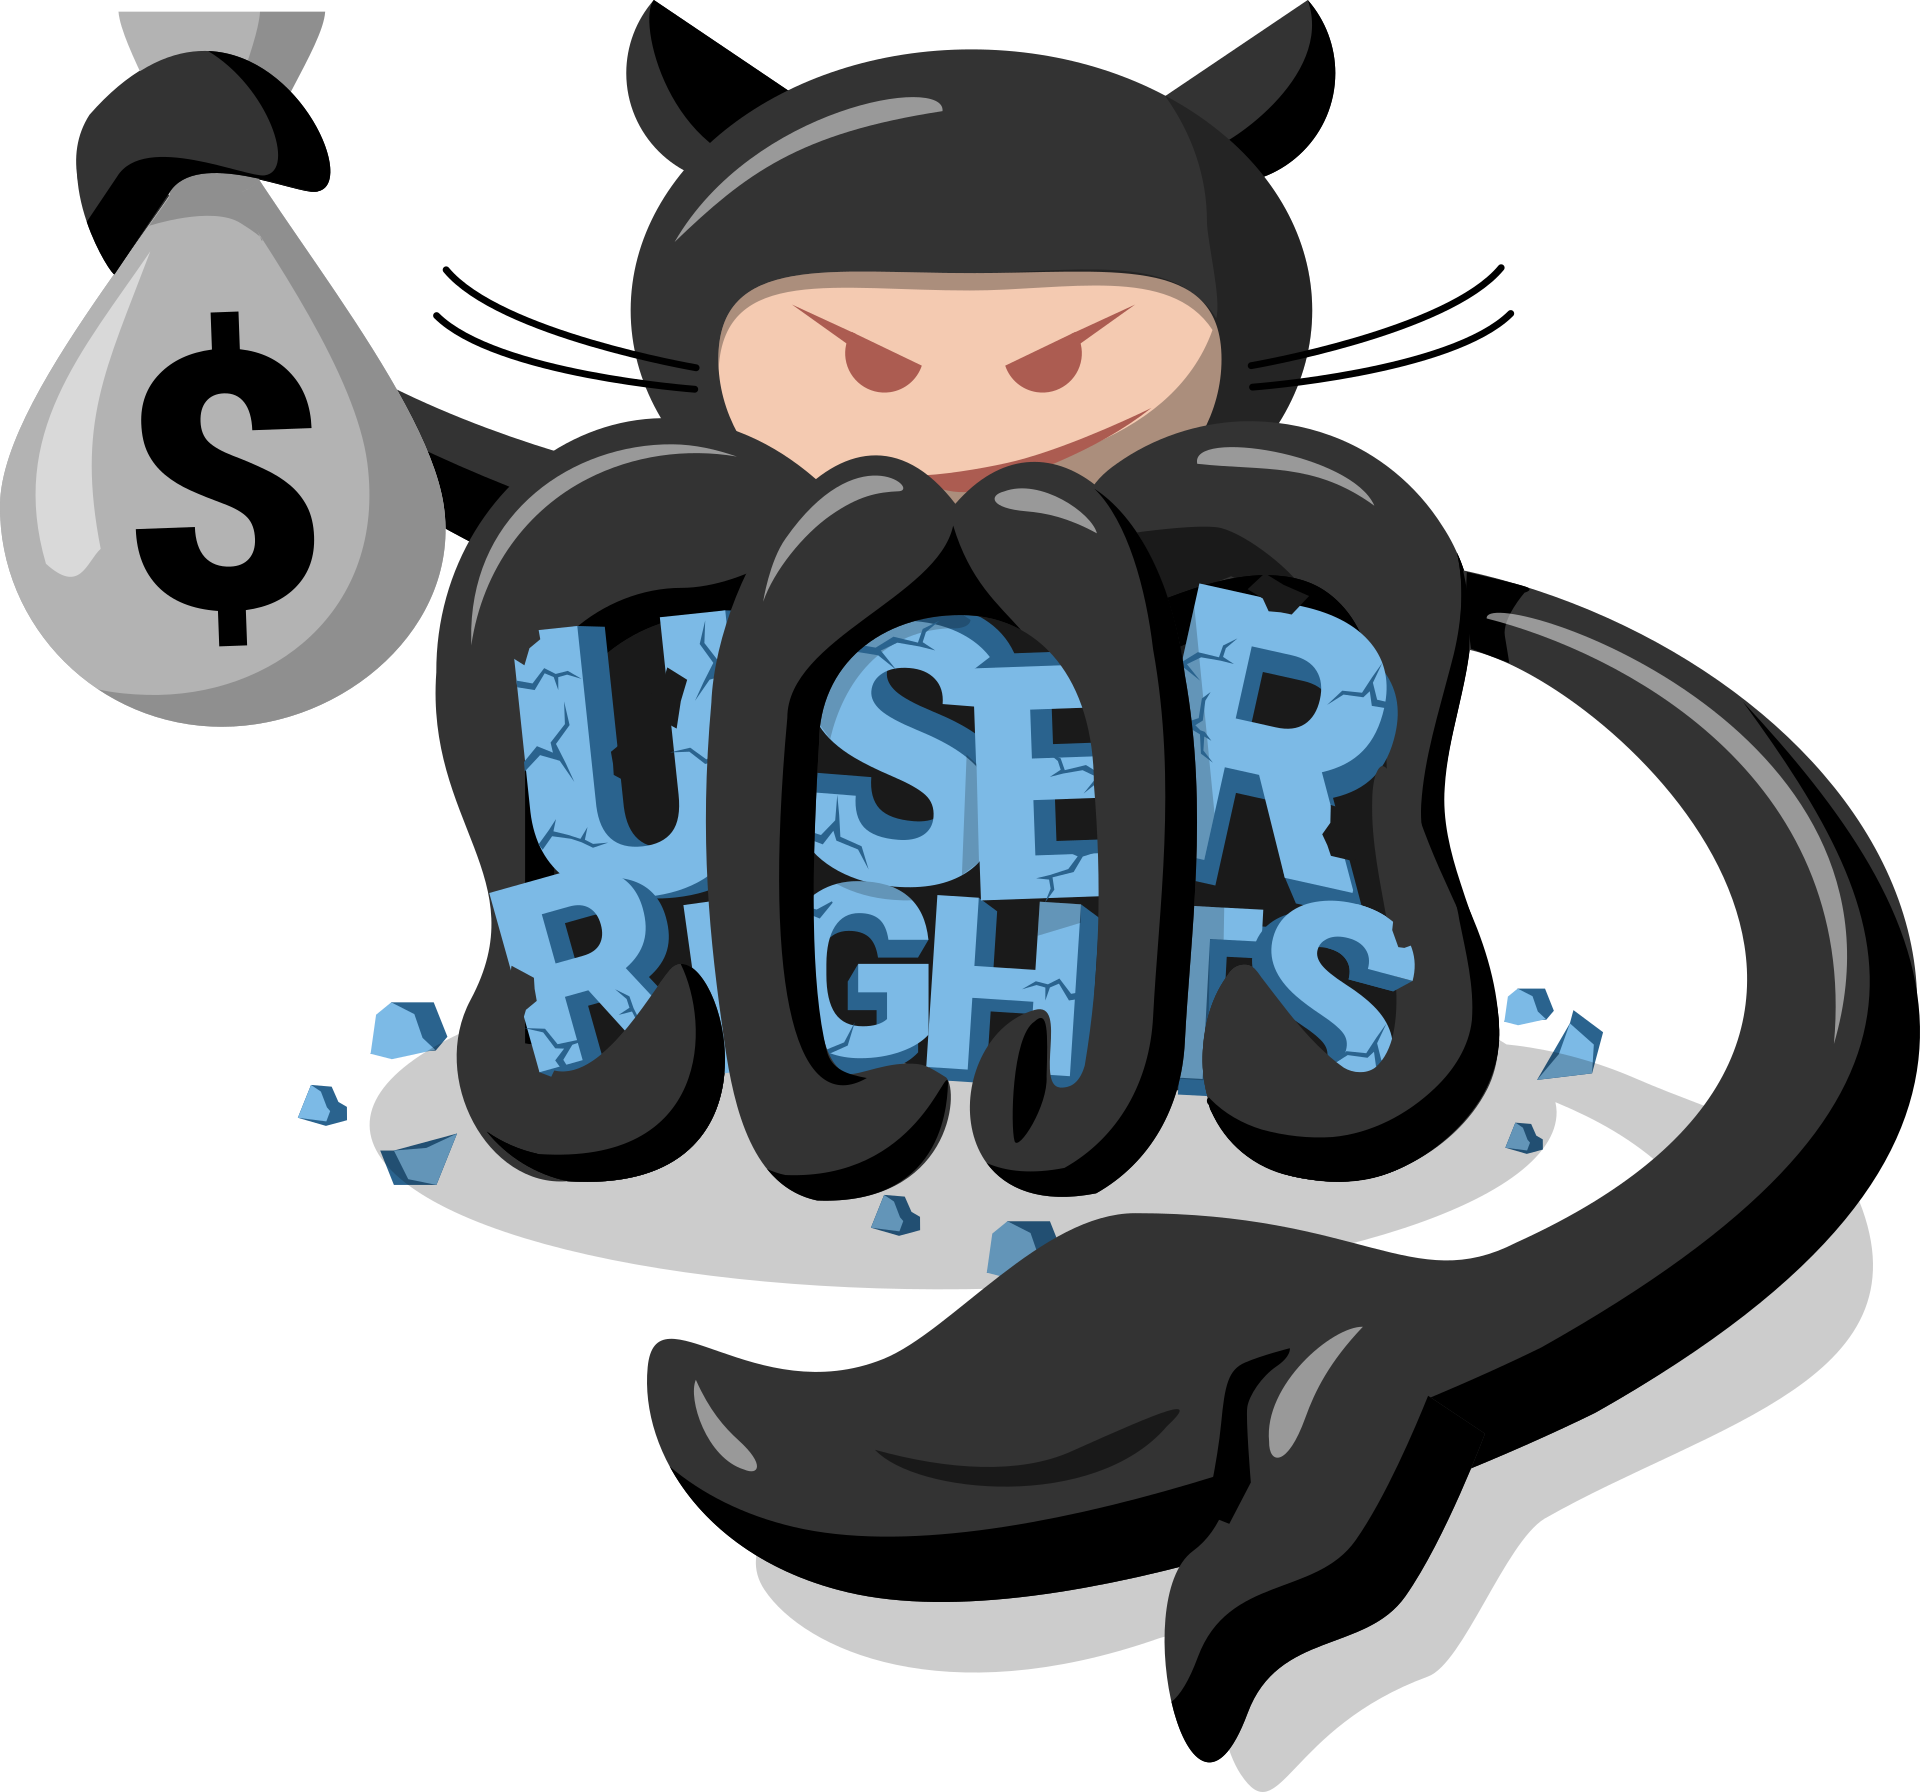 Logo of the GiveUpGitHub campaign